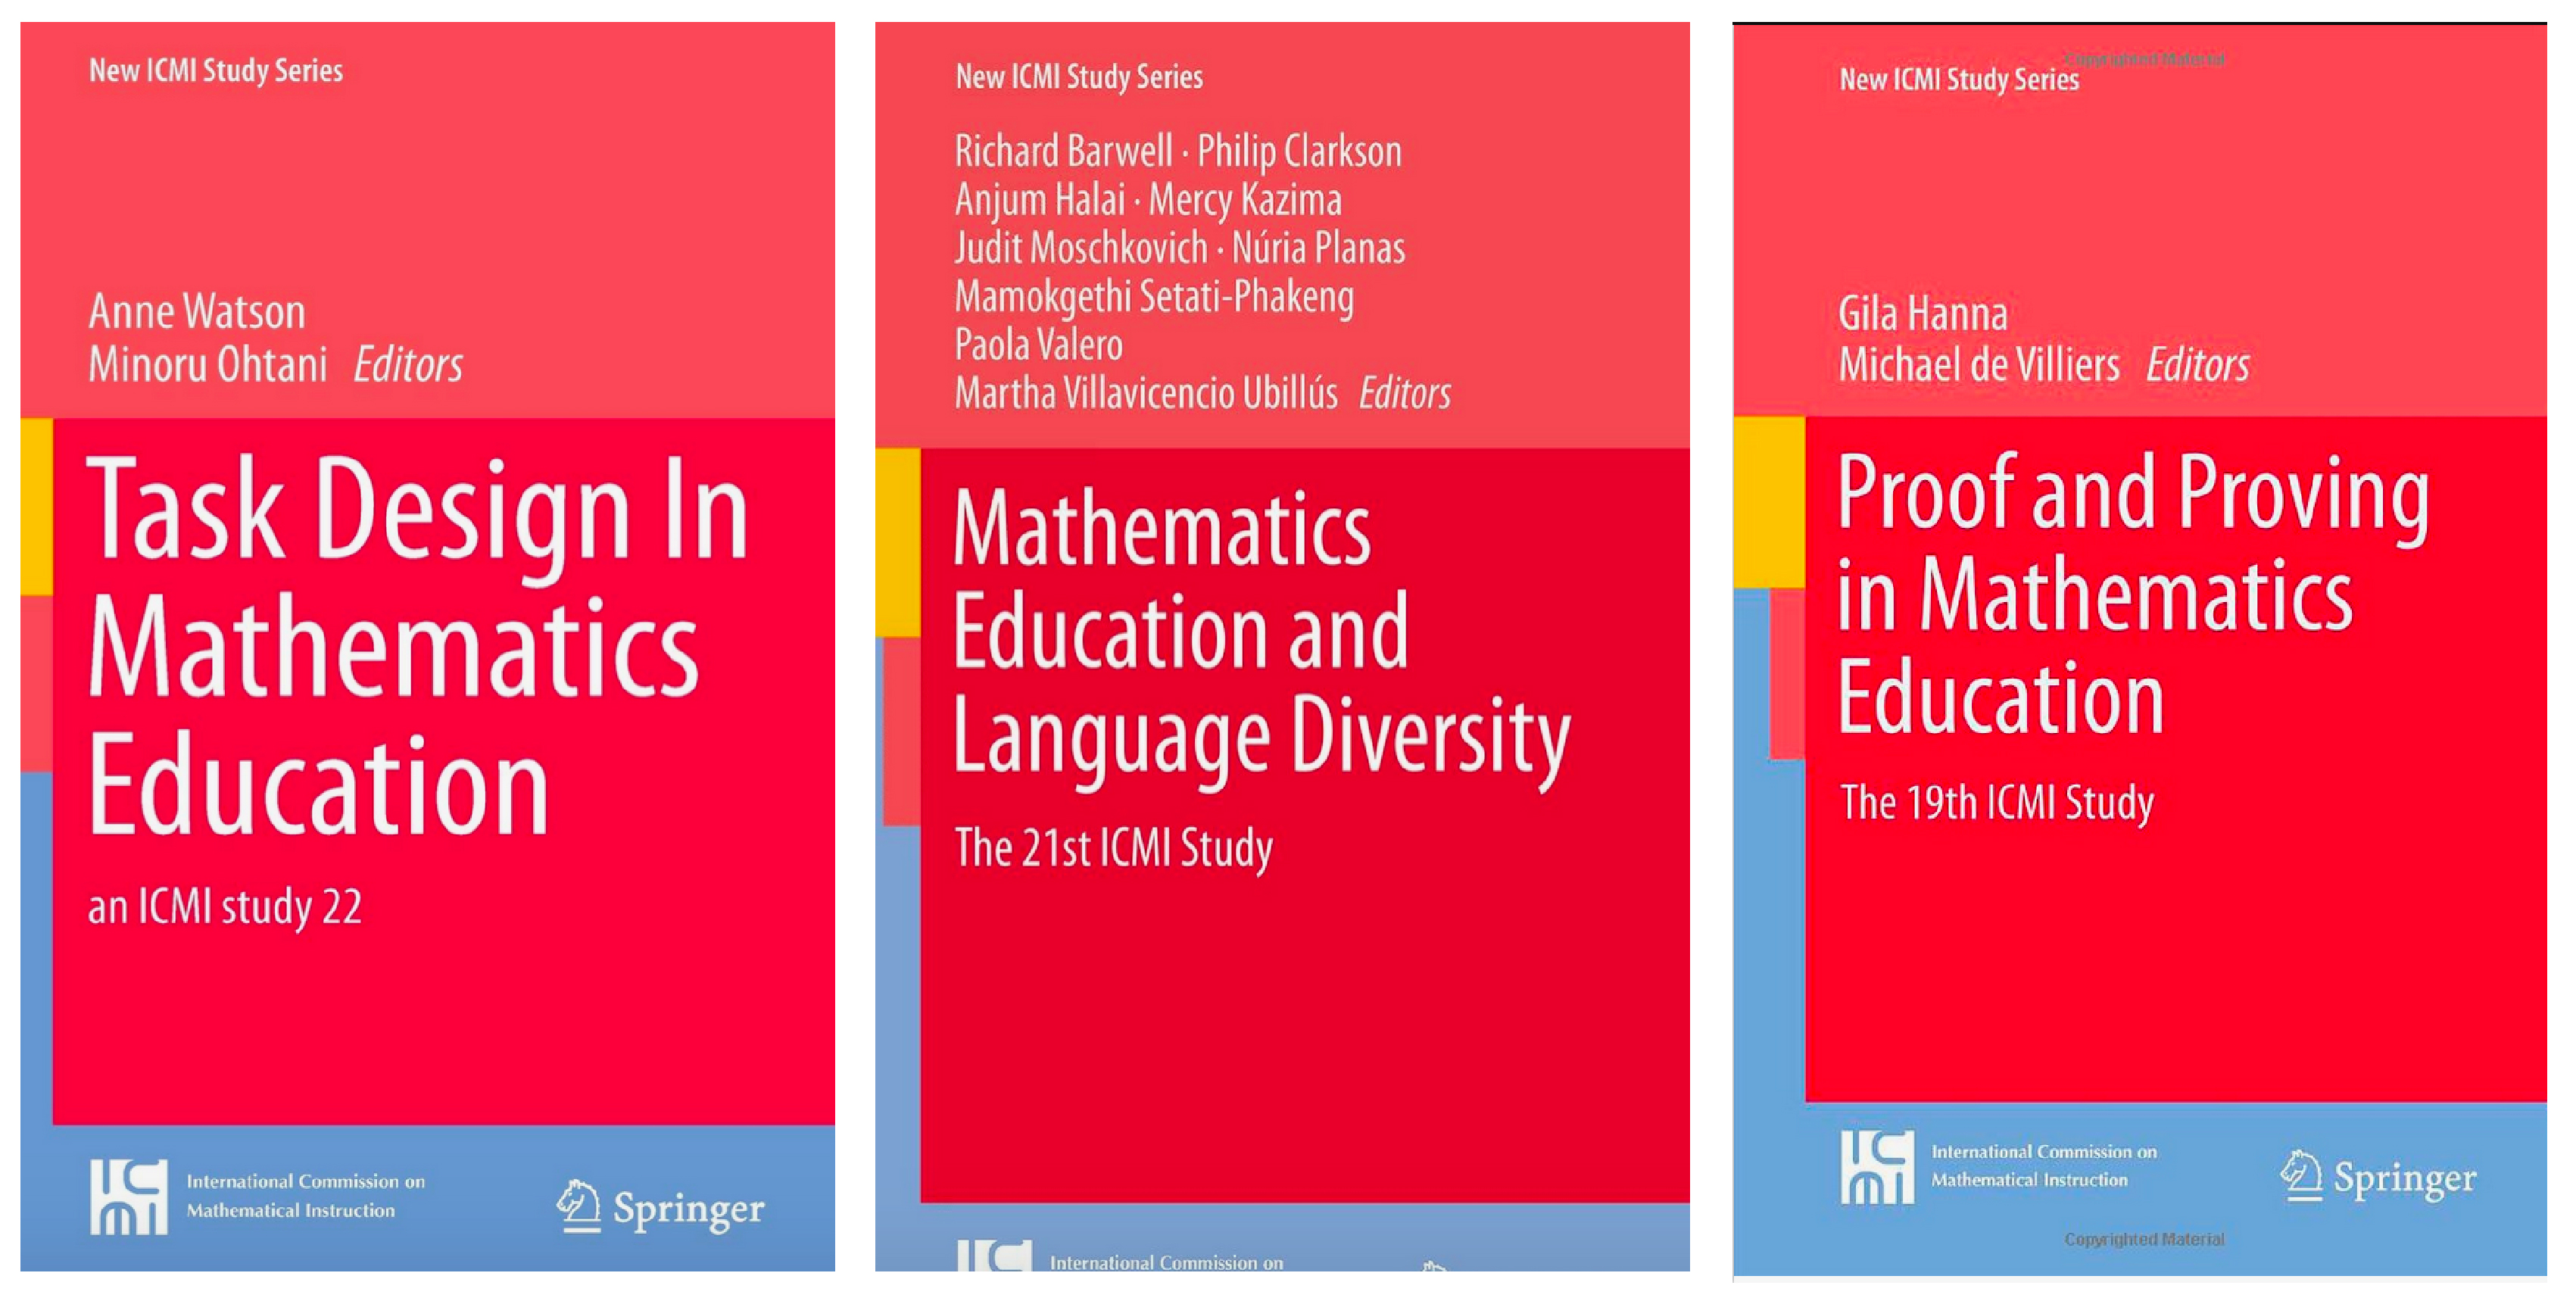 Covers of ICMI Studies 19, 21 and 22.